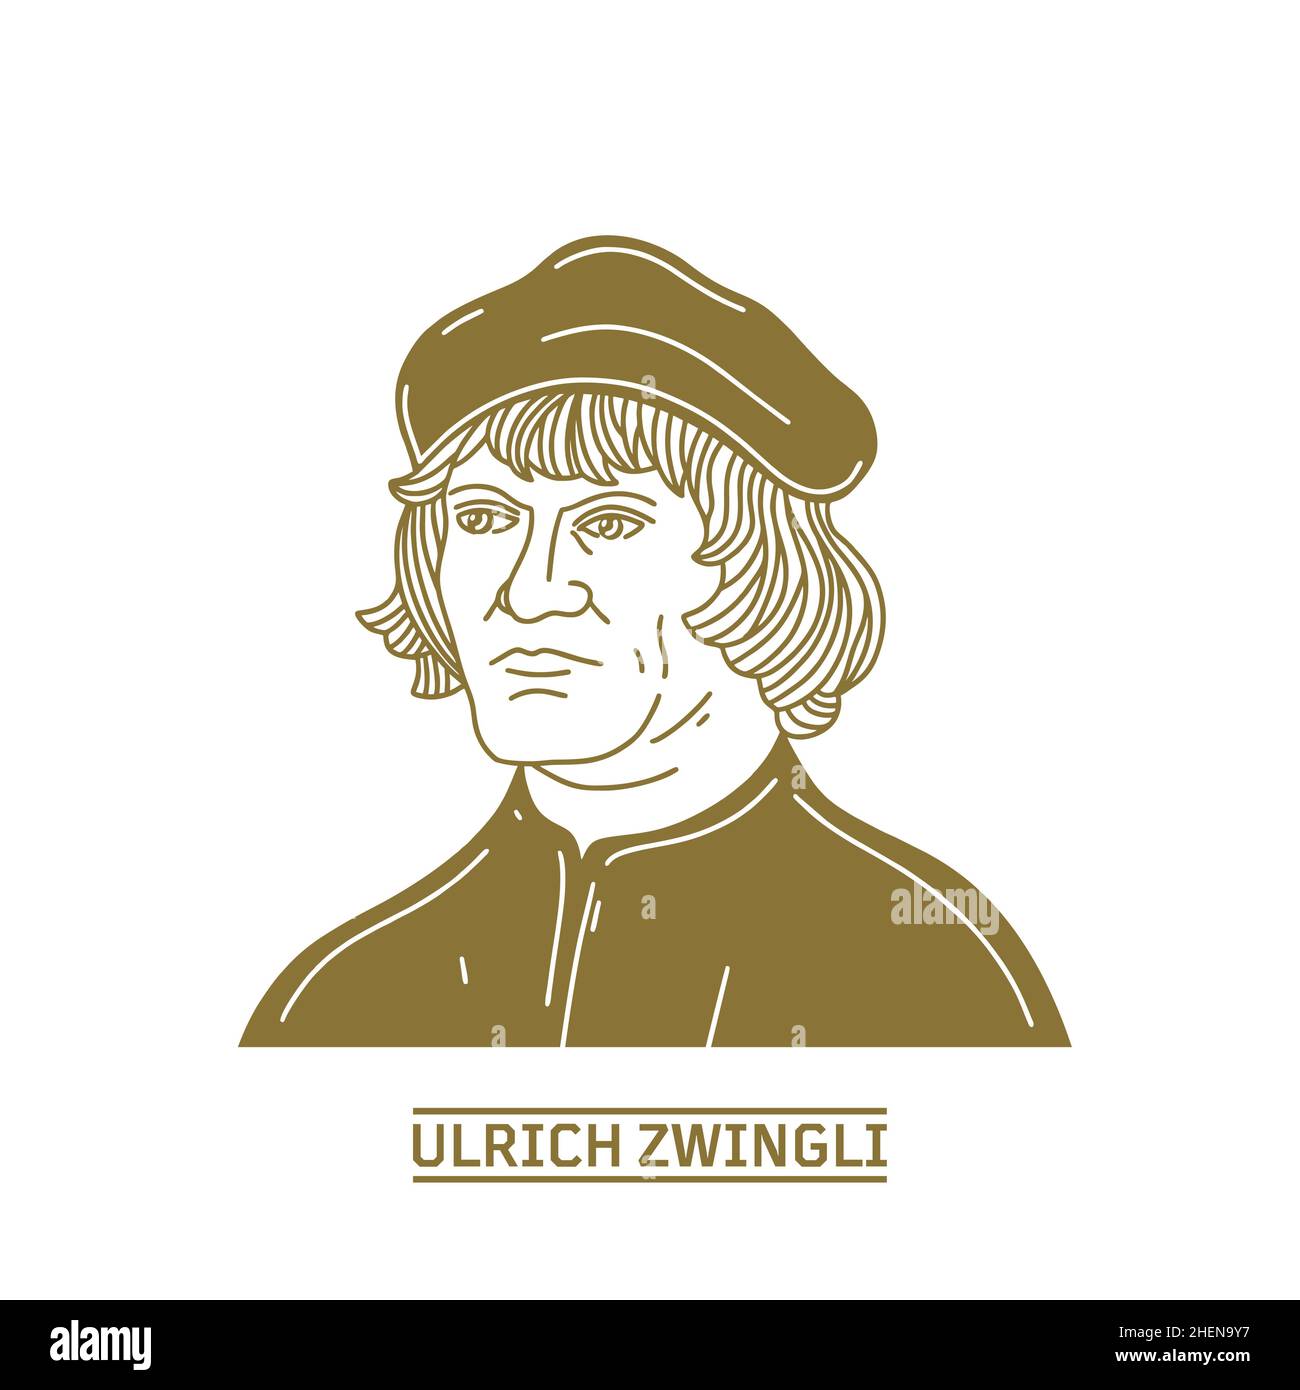 Ulrich Zwingli (1484-1531) was a leader of the Reformation in Switzerland. Christian figure. Stock Vector